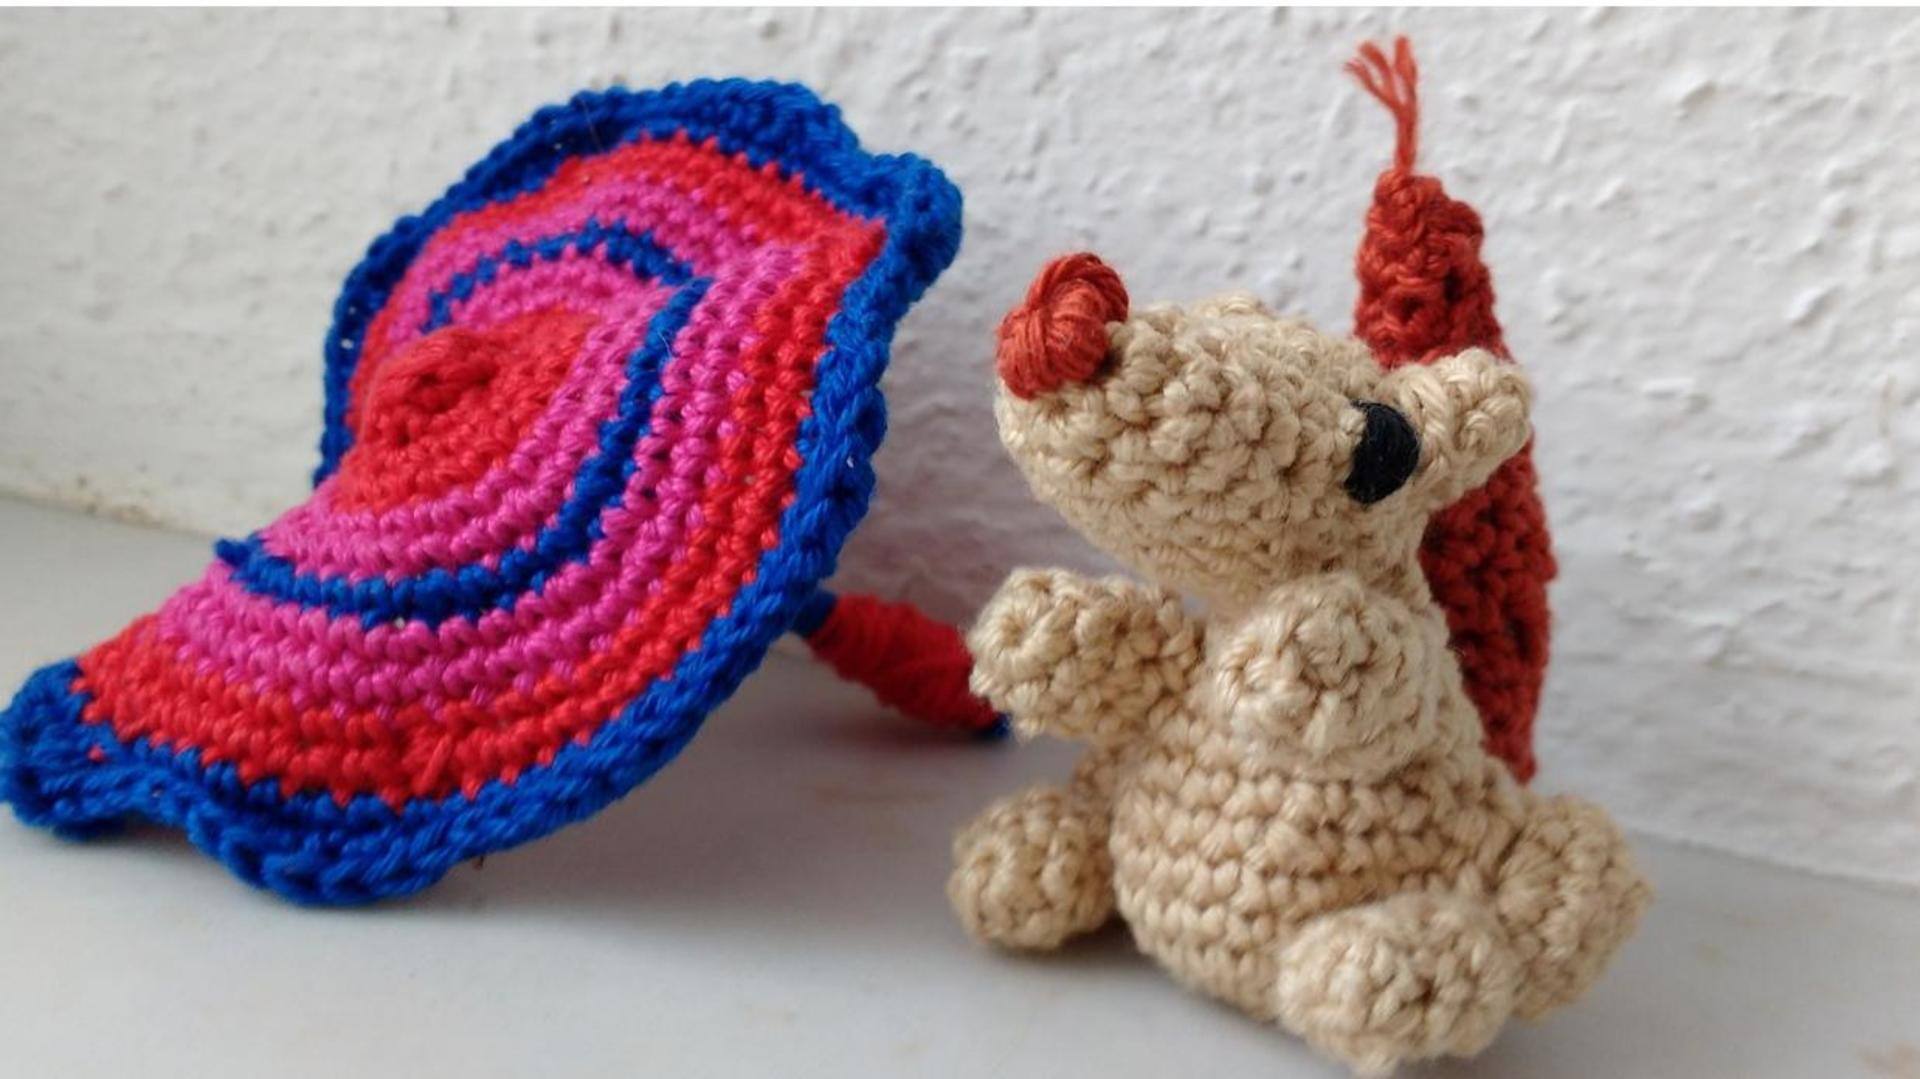 What is amigurumi? Learn about this cute craft